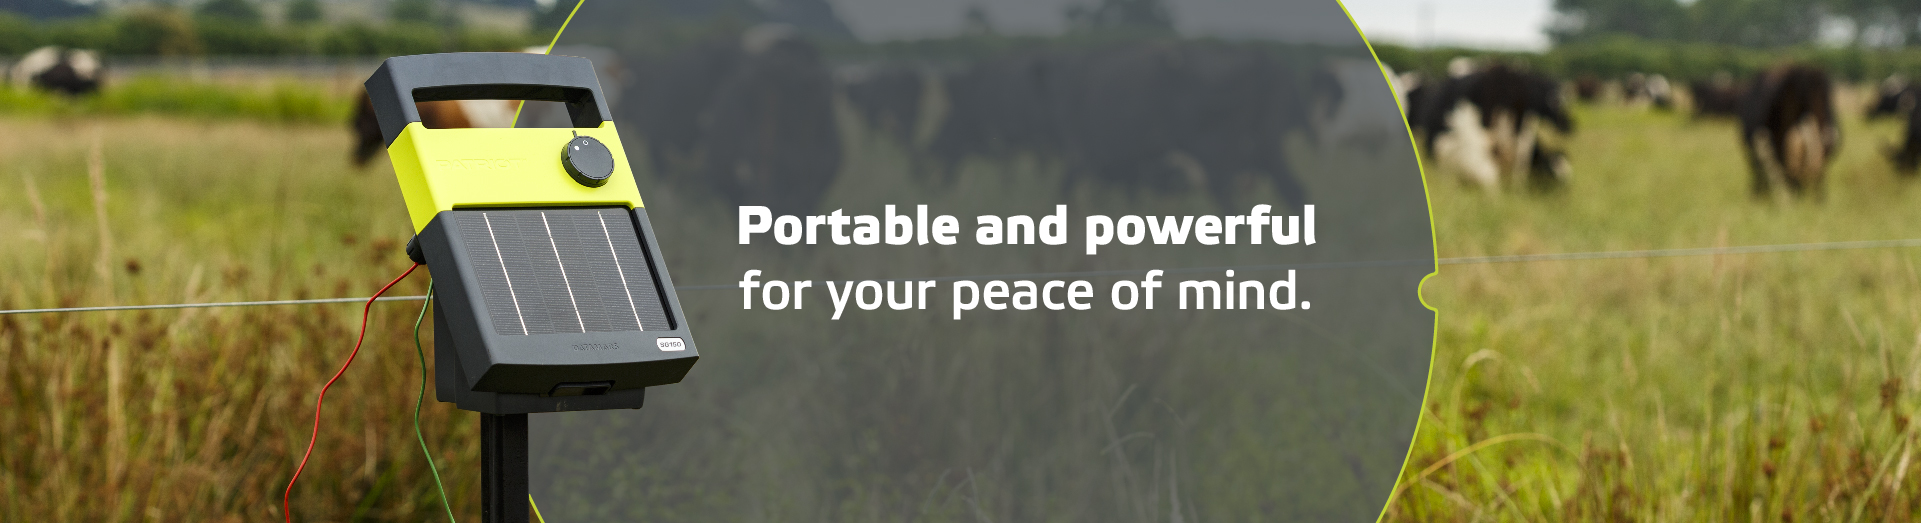 Portable and Powerful for your peace of mind